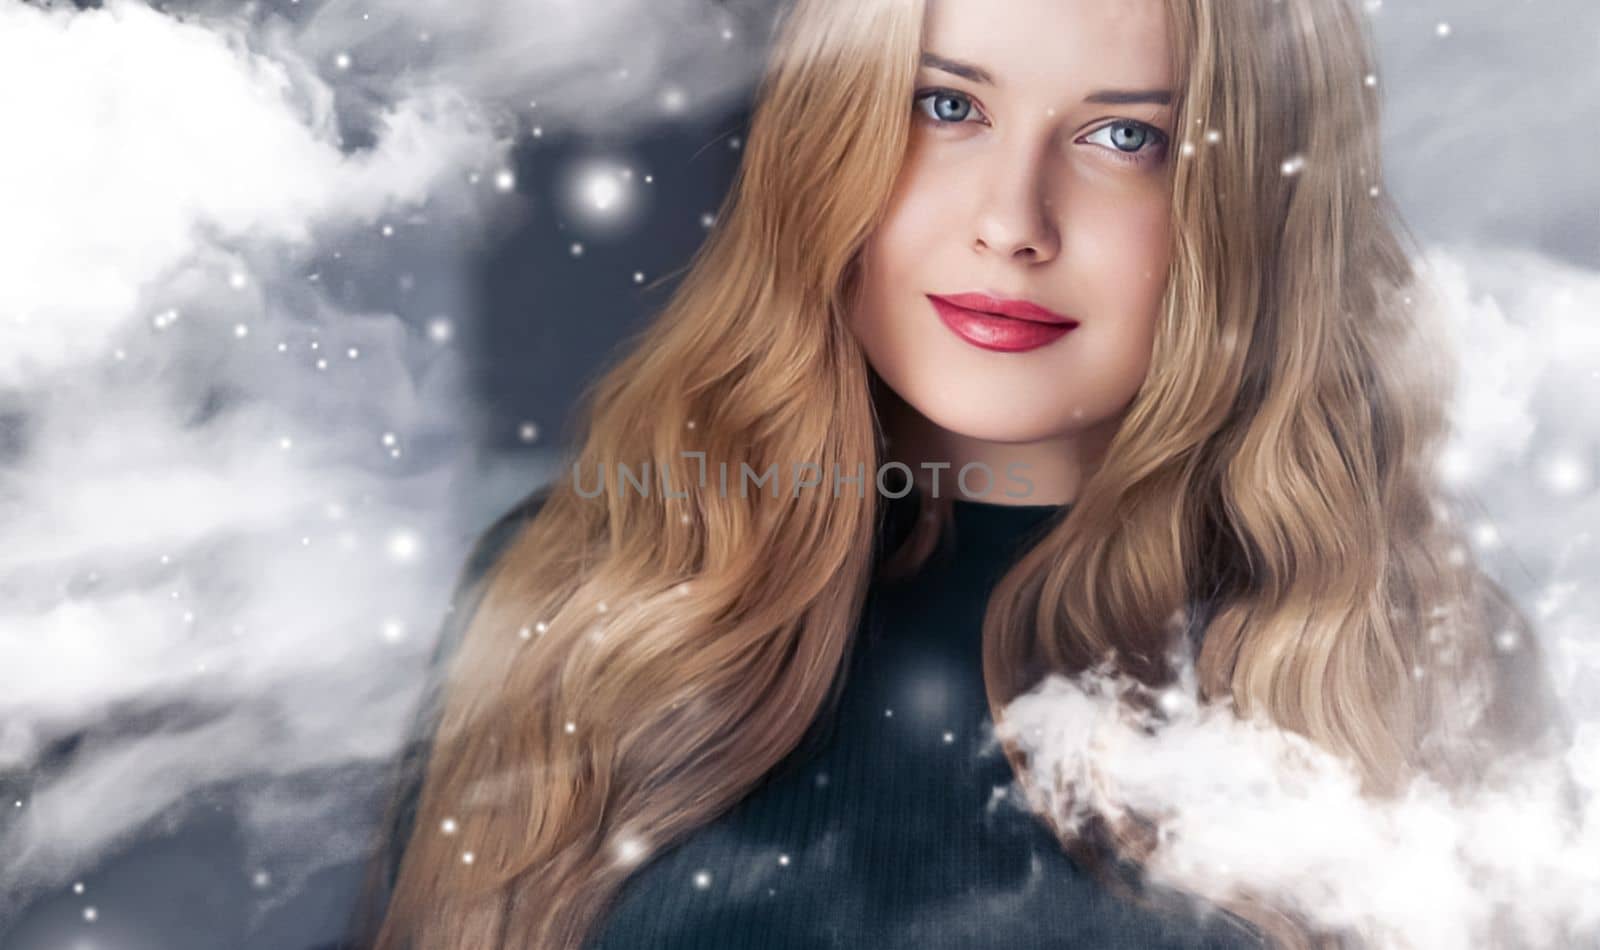 Winter beauty, Christmas time and happy holidays, beautiful woman with long hairstyle and natural make-up behind frozen window, snowing snow design as xmas, New Year and holiday lifestyle portrait by Anneleven